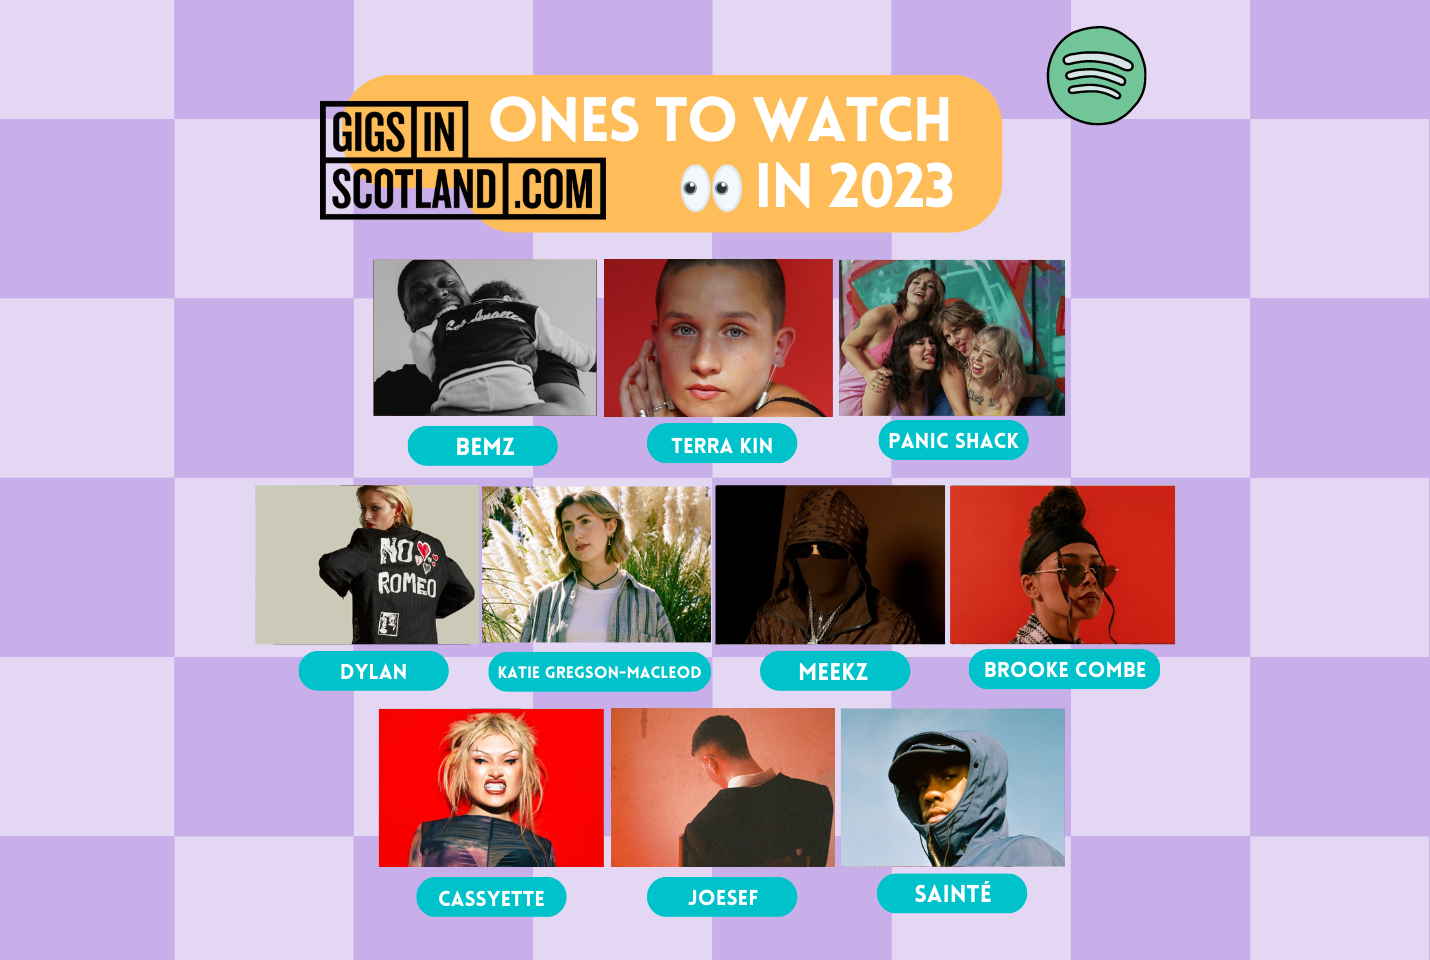 GIGS IN SCOTLAND'S ONES TO WATCH IN 2023...